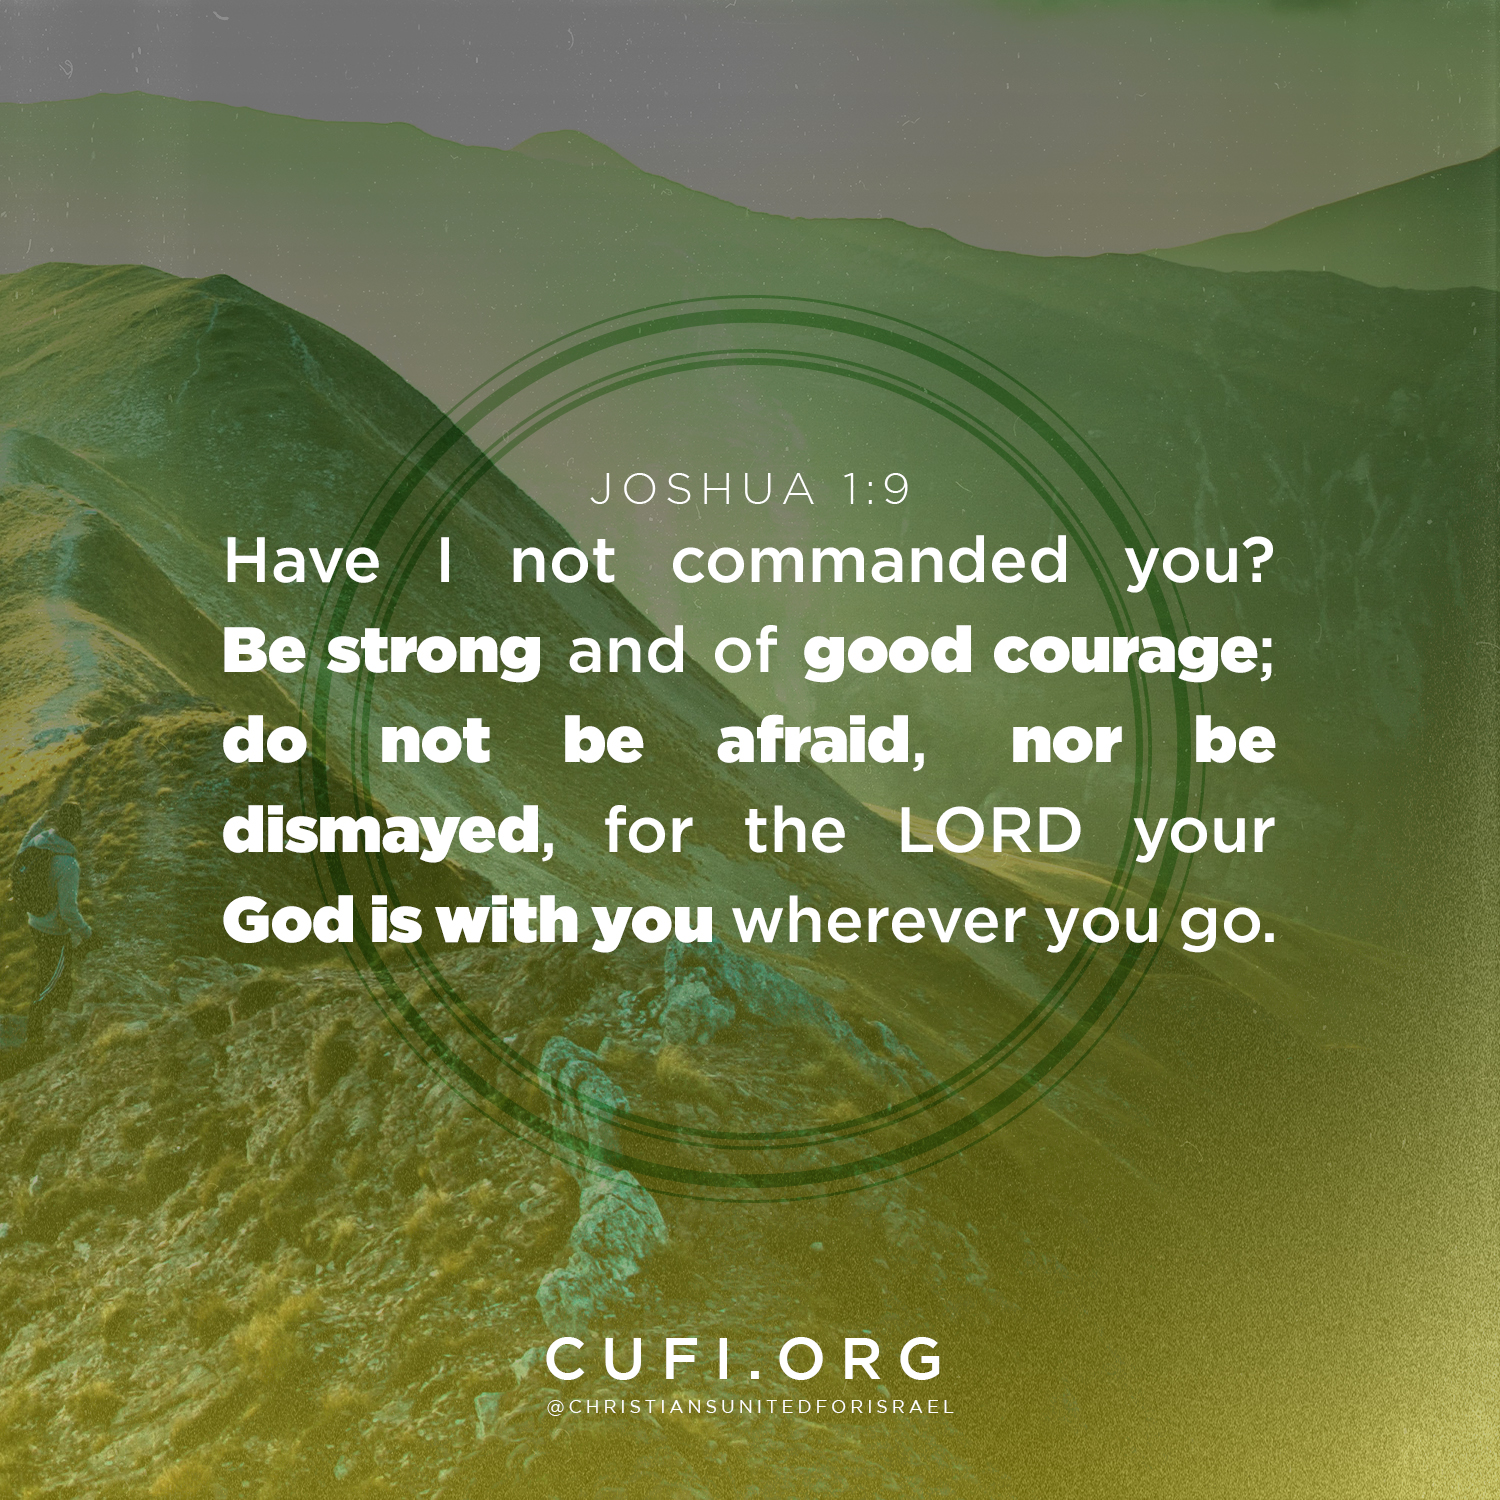 'JOSHUA 1:9 Have I not commanded you? Be strong and of good courage; do not be afraid, nor be dismayed, for the LORD your God is with you wherever you go. CUFI.ORG @CHRISTIANSUNITEDFORISRAEL'